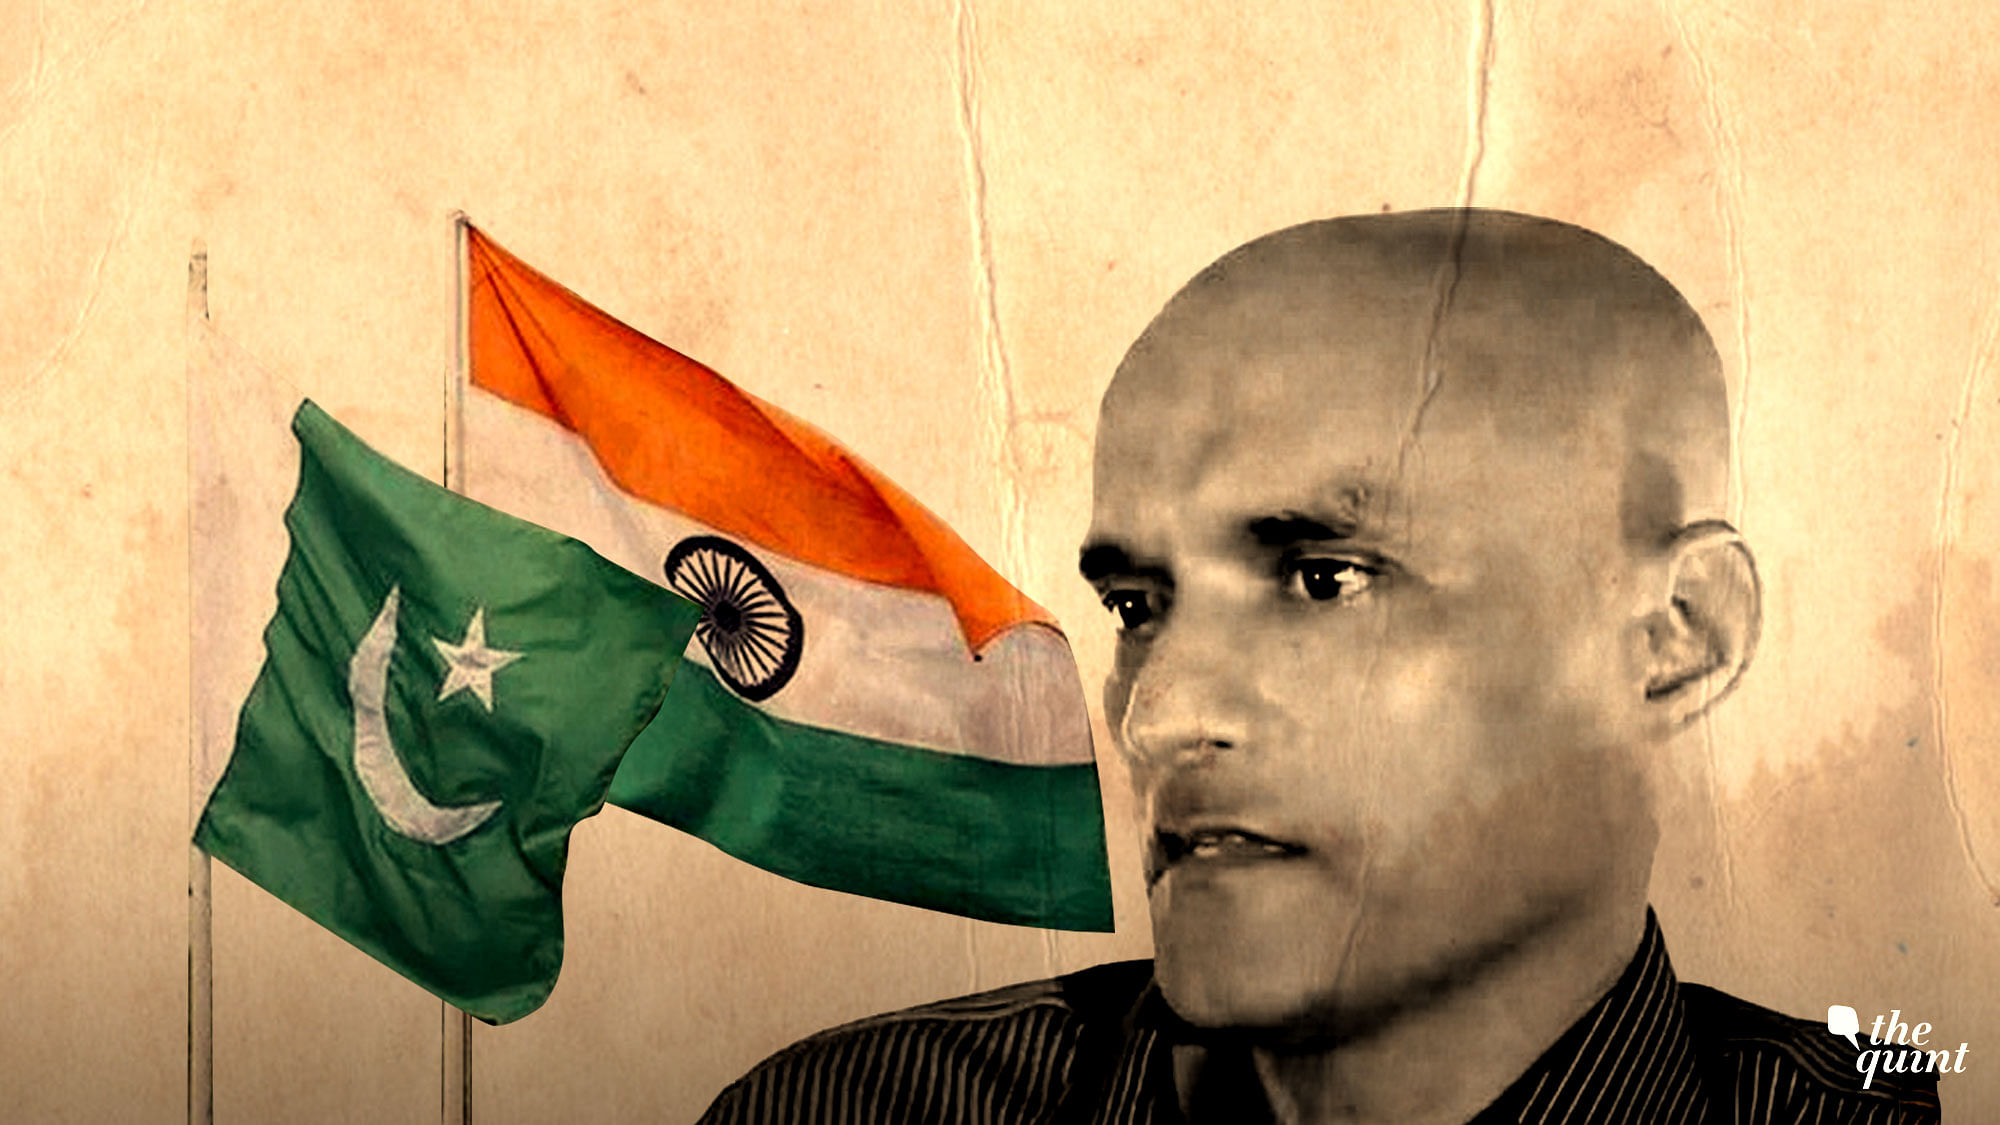 Top legal eagles of the two countries will present their arguments in the high-profile Kulbhushan Jadhav case before the International Court of Justice (ICJ).